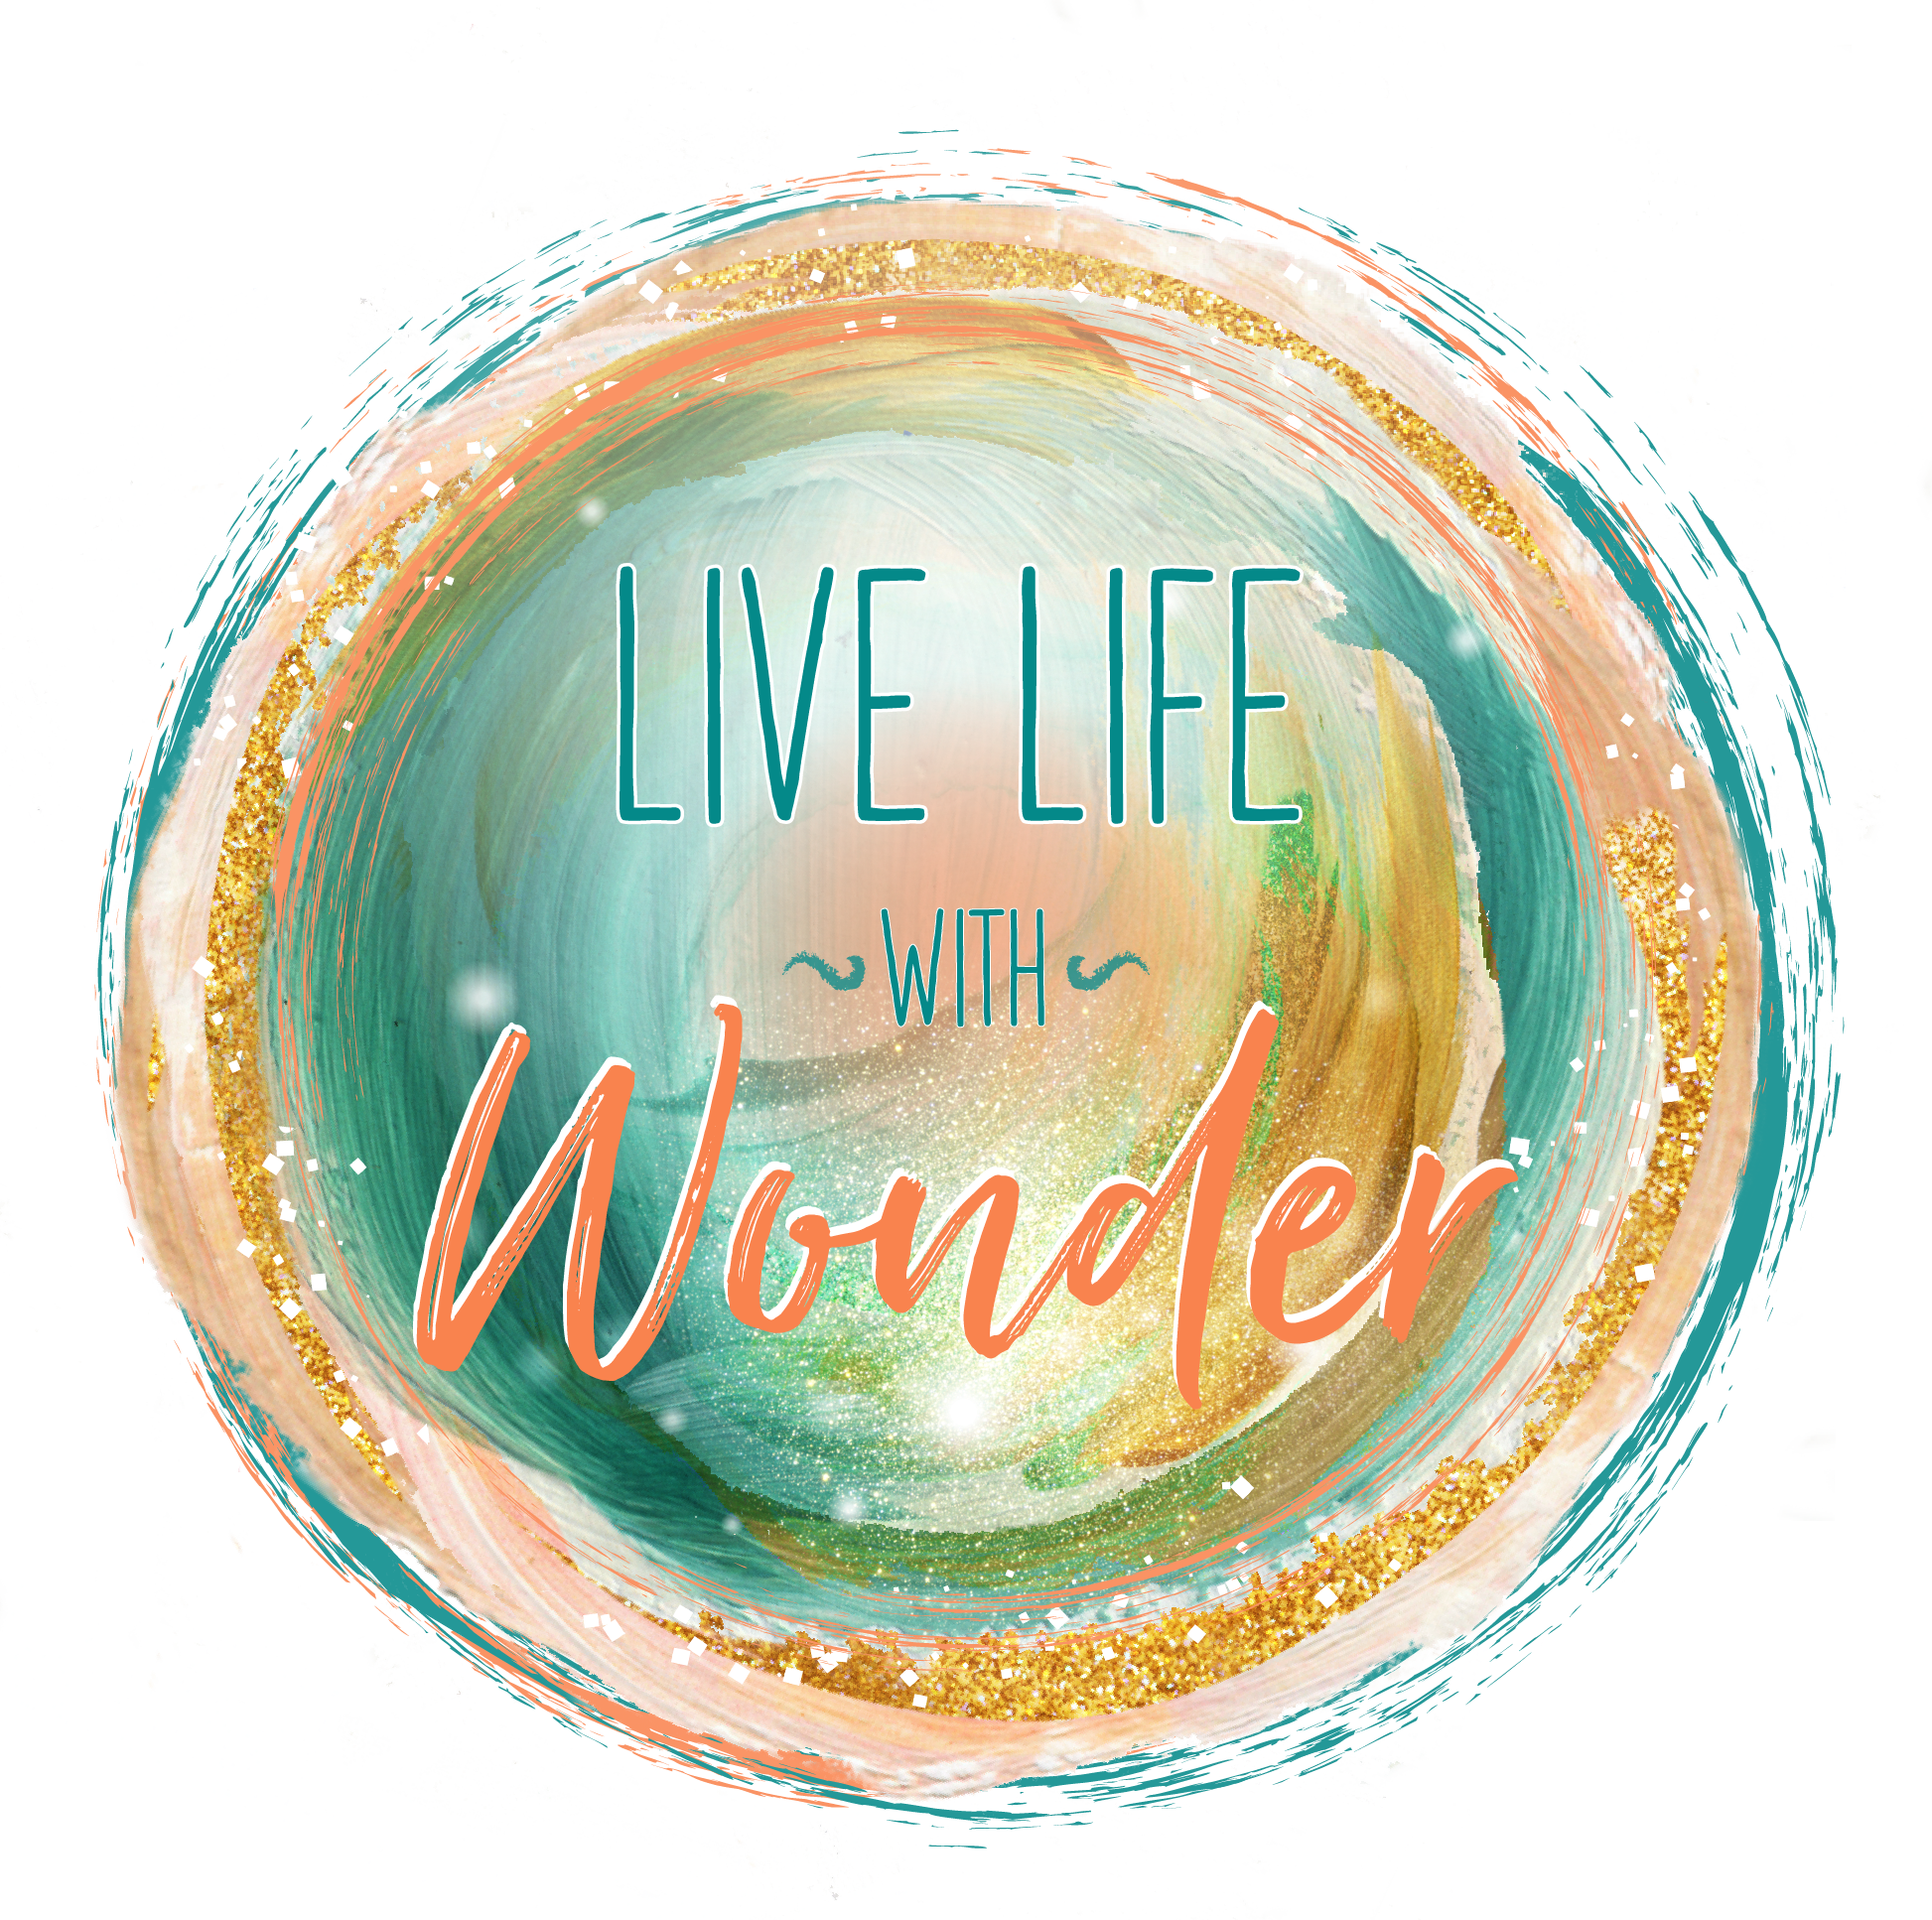 Live Life with Wonder